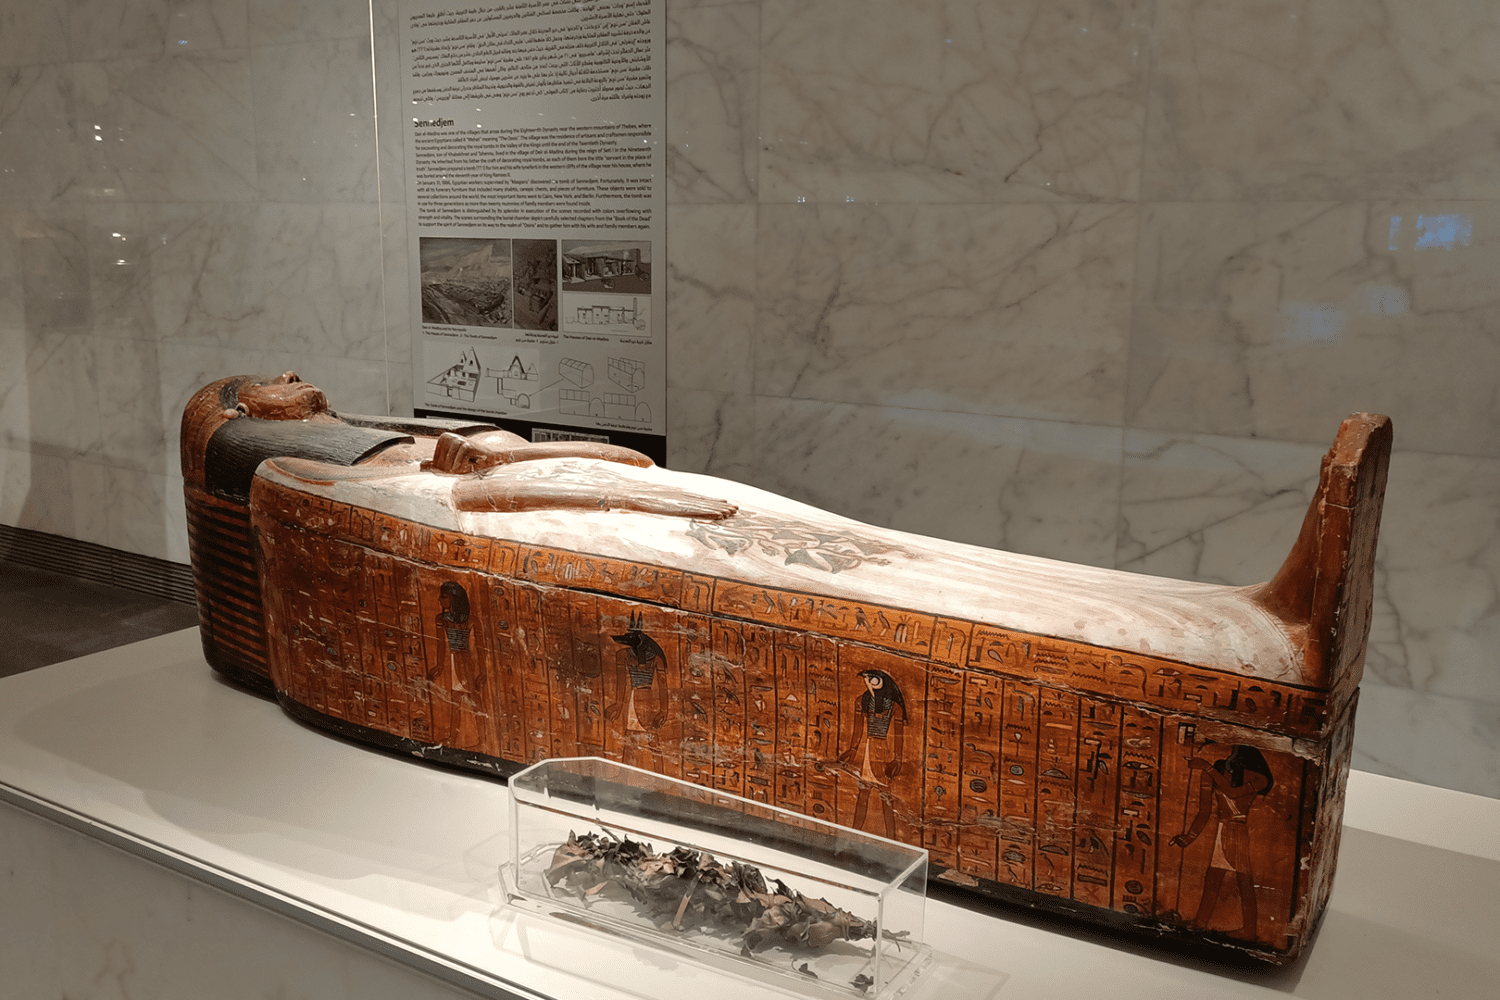 National Museum of Egyptian Civilization - Cairo | Ancient Egypt & The Red Sea Tour | Egypt in the Golden Age of Travel Luxury Tour | National Museum of Egyptian Civilization Tour